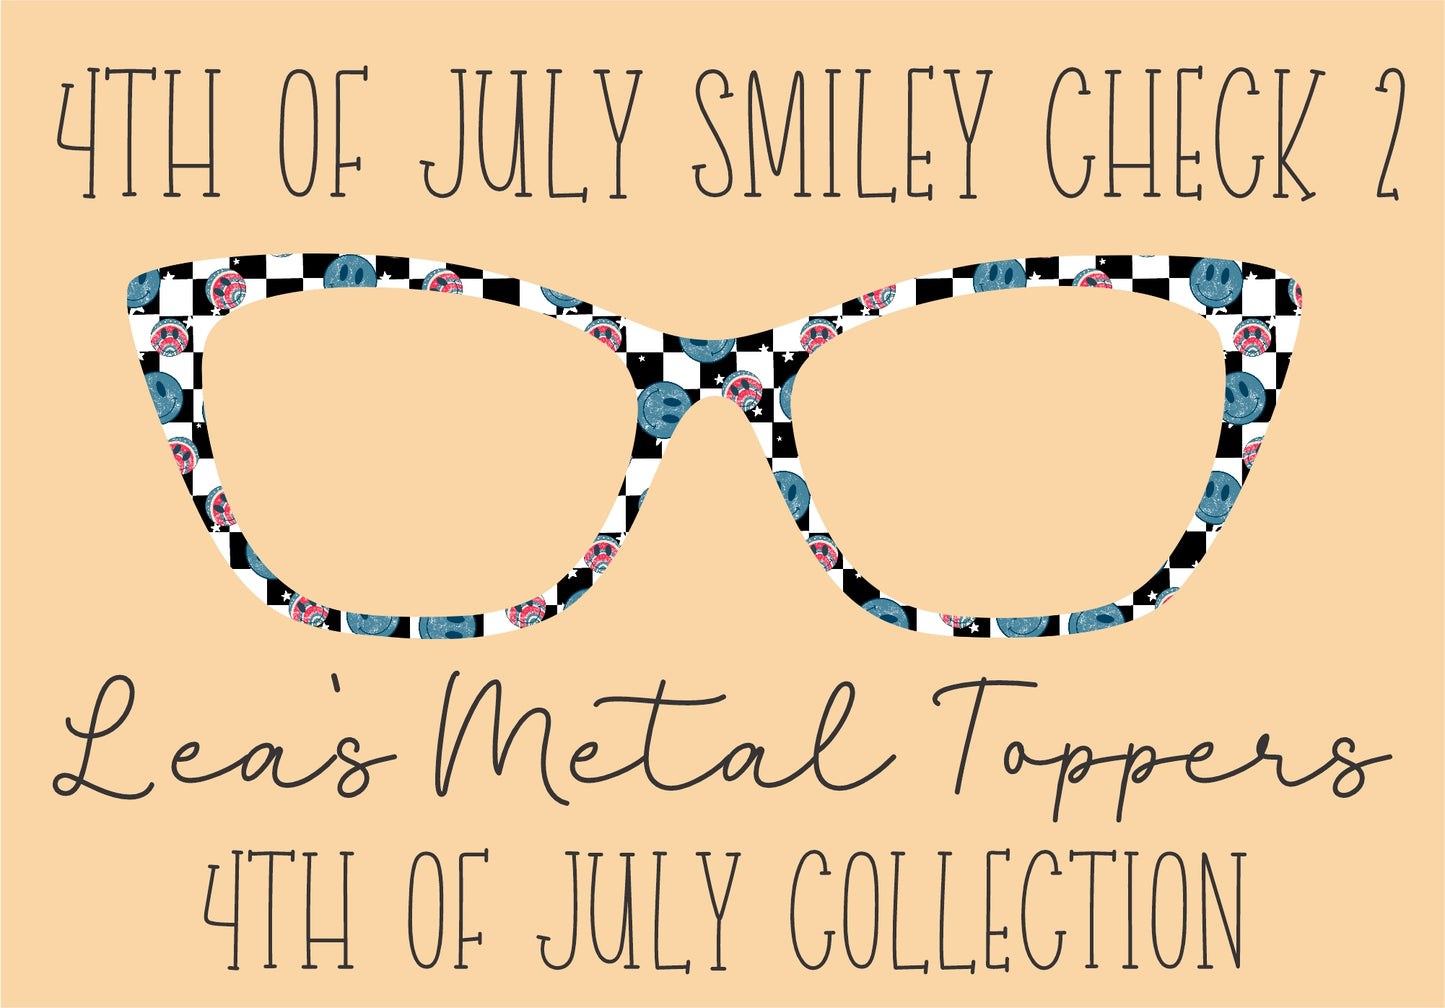 4TH OF JULY SMILEY CHECK 2 Eyewear Frame Toppers COMES WITH MAGNETS